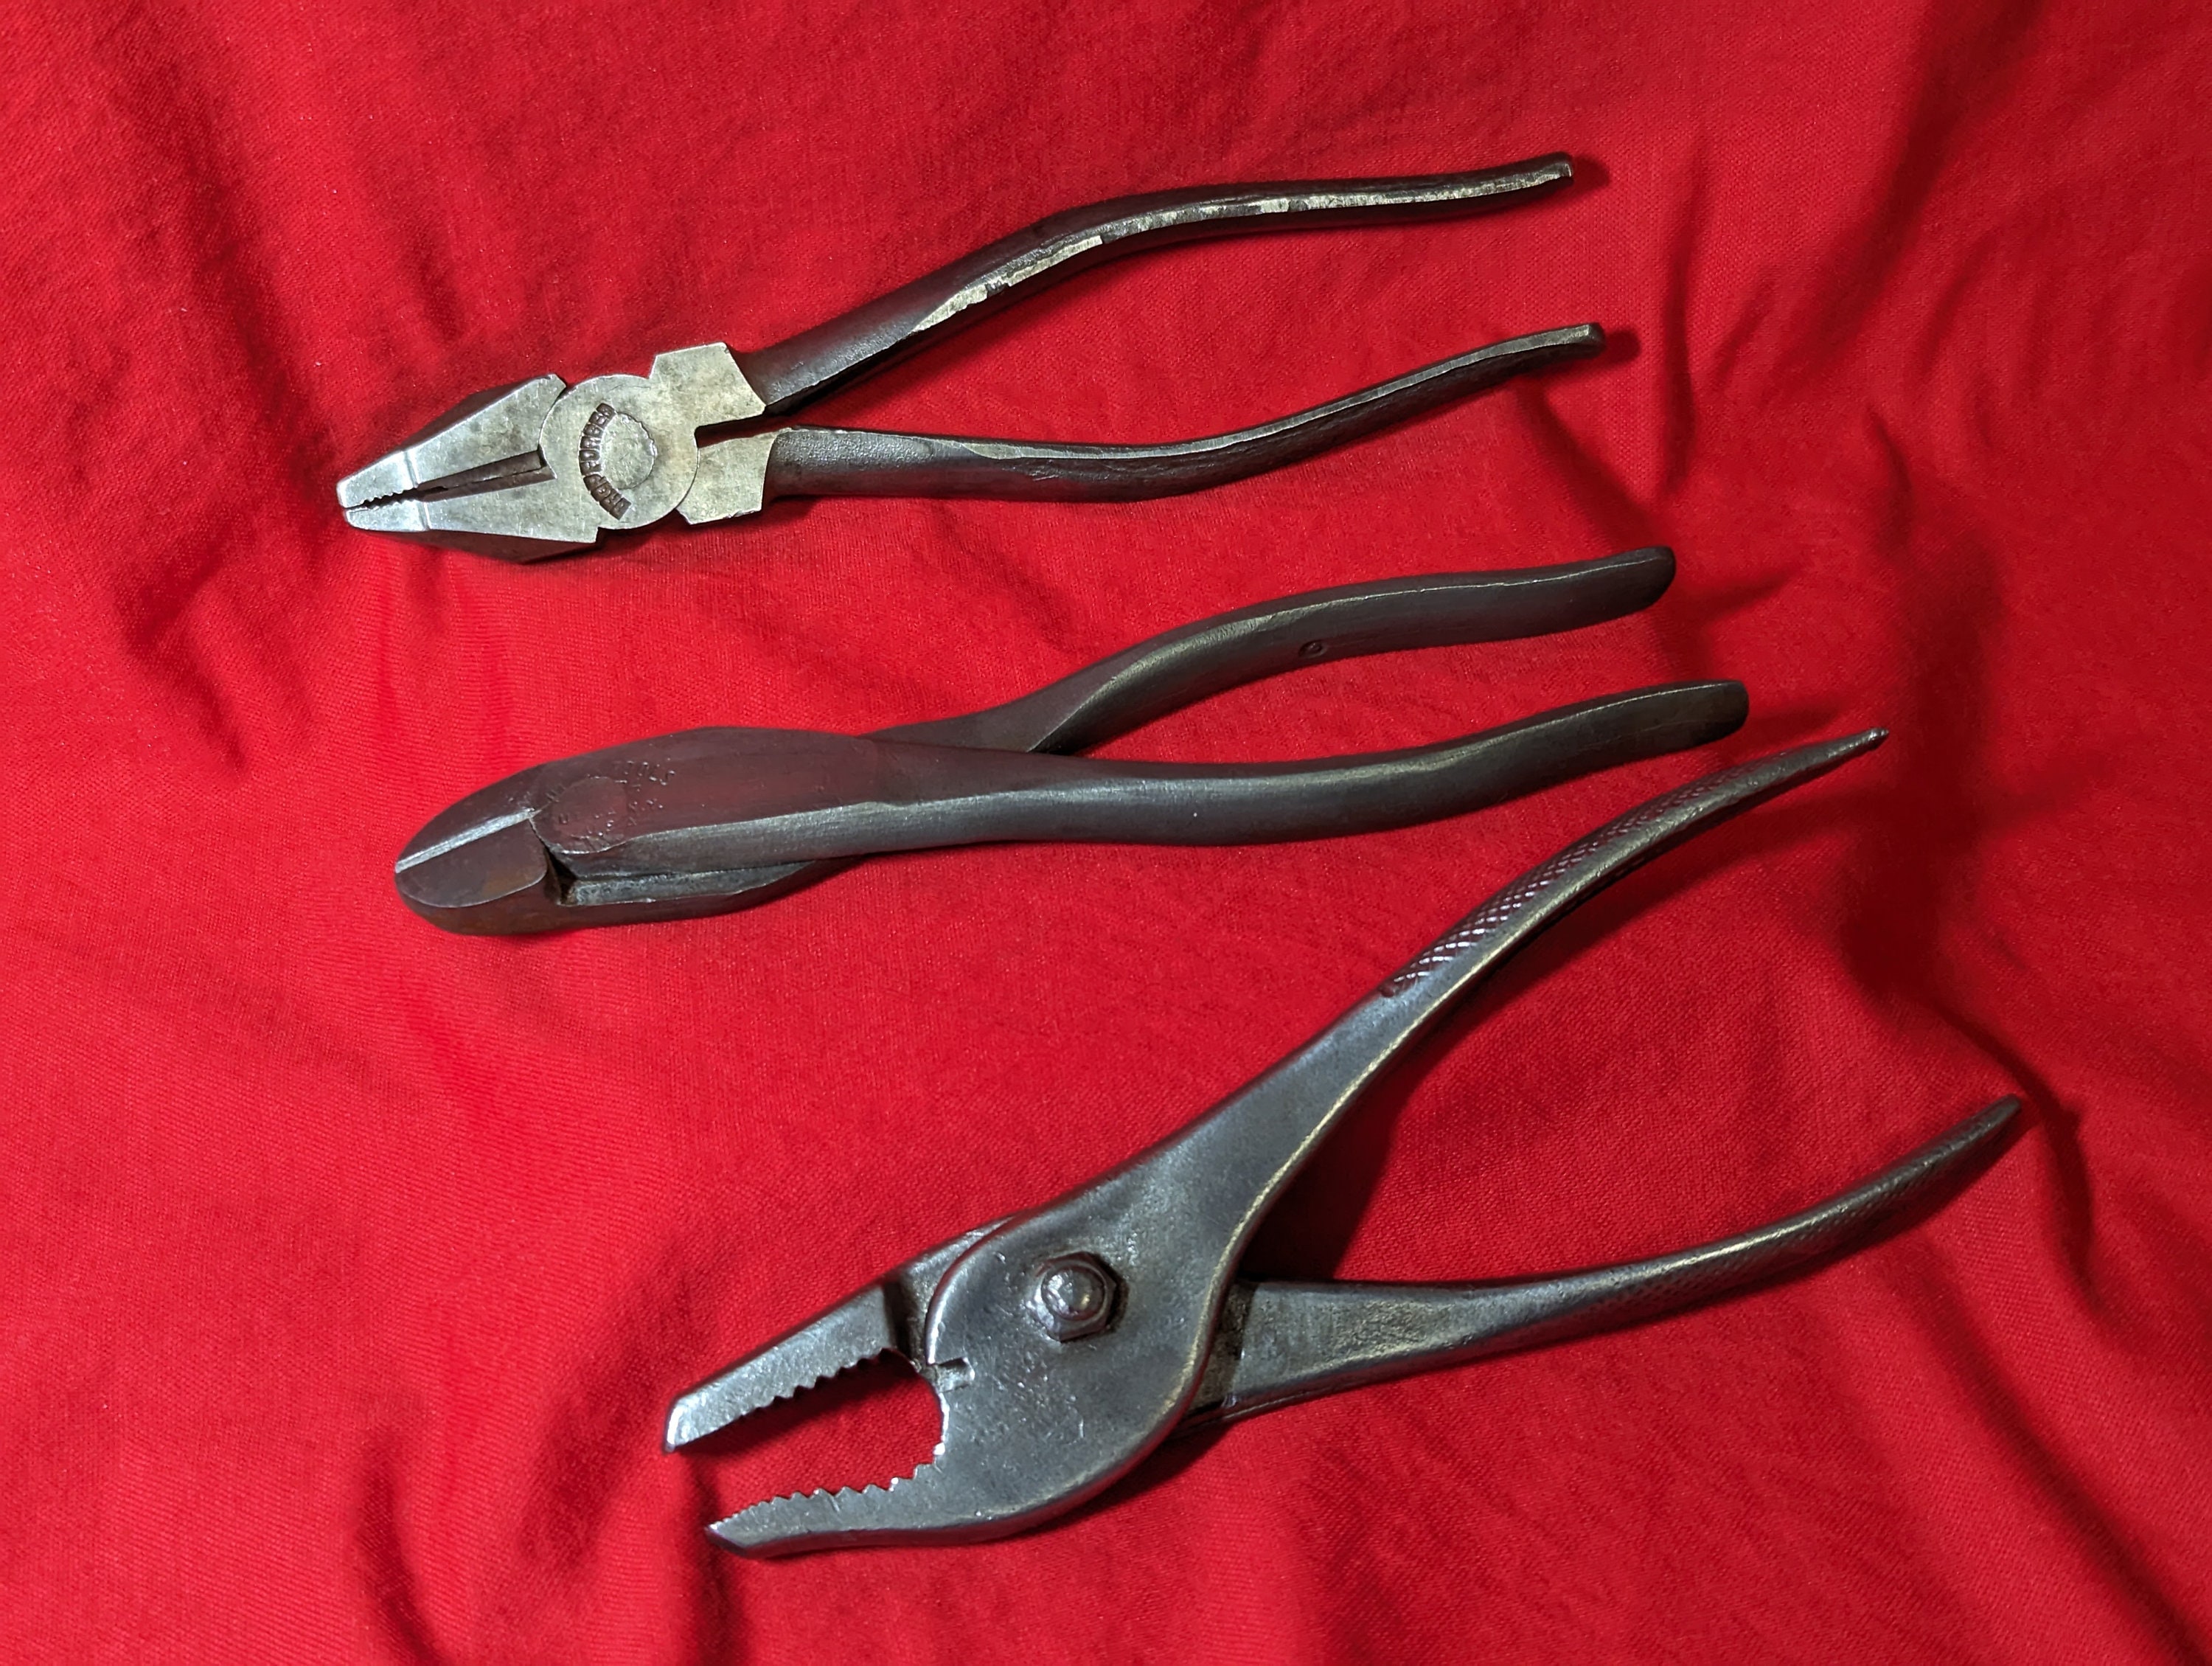 UITCA Curved Needle Nose Pliers #888 6 Long Angled - Bent - N.Y.